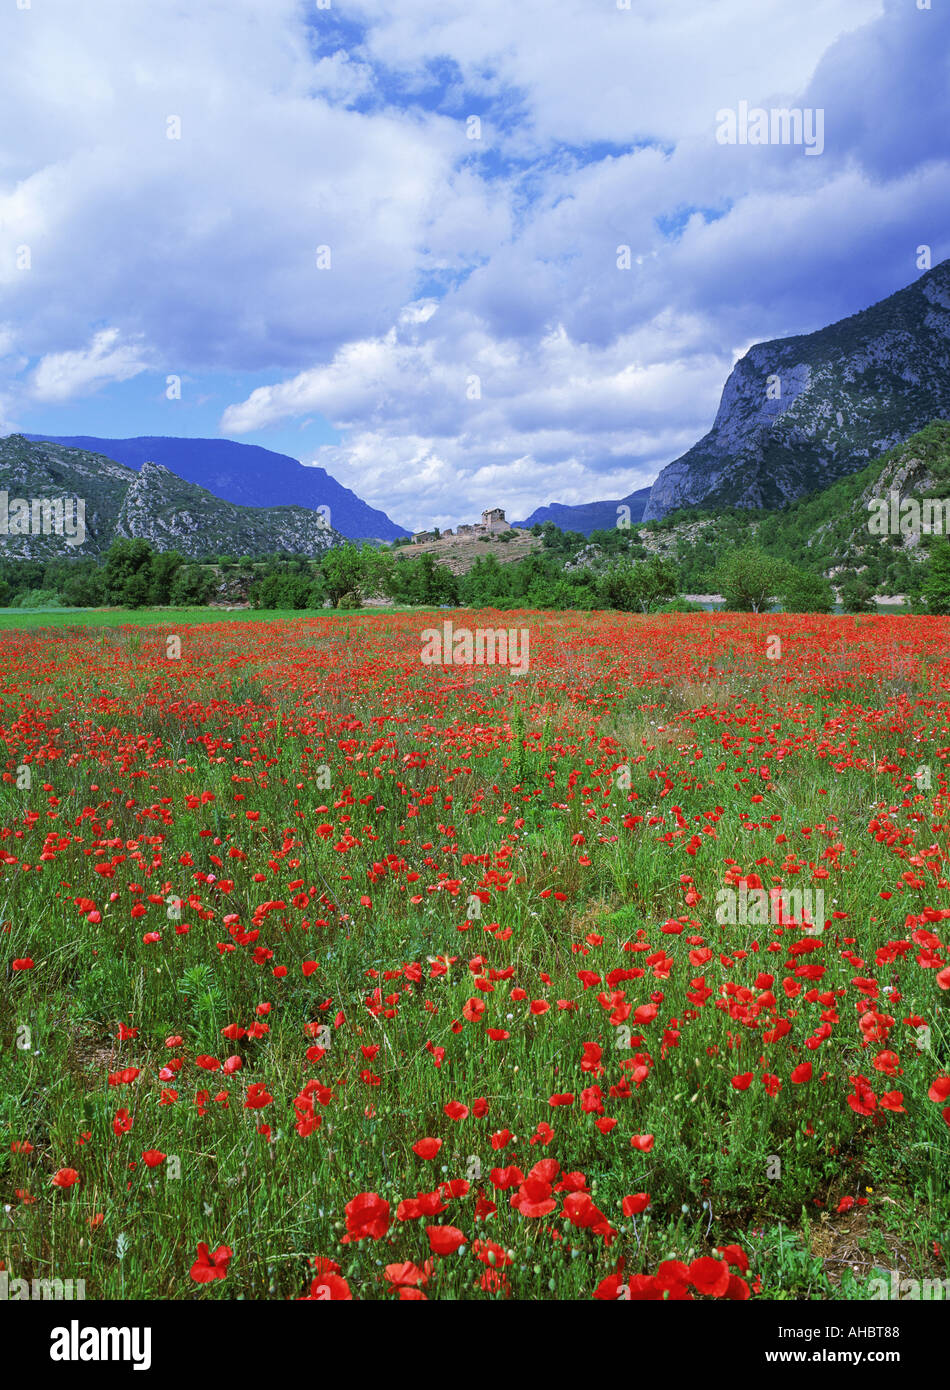 Spanish village of Coll de Nargo above field of red poppies in Catalonia in Pyrenees Stock Photo